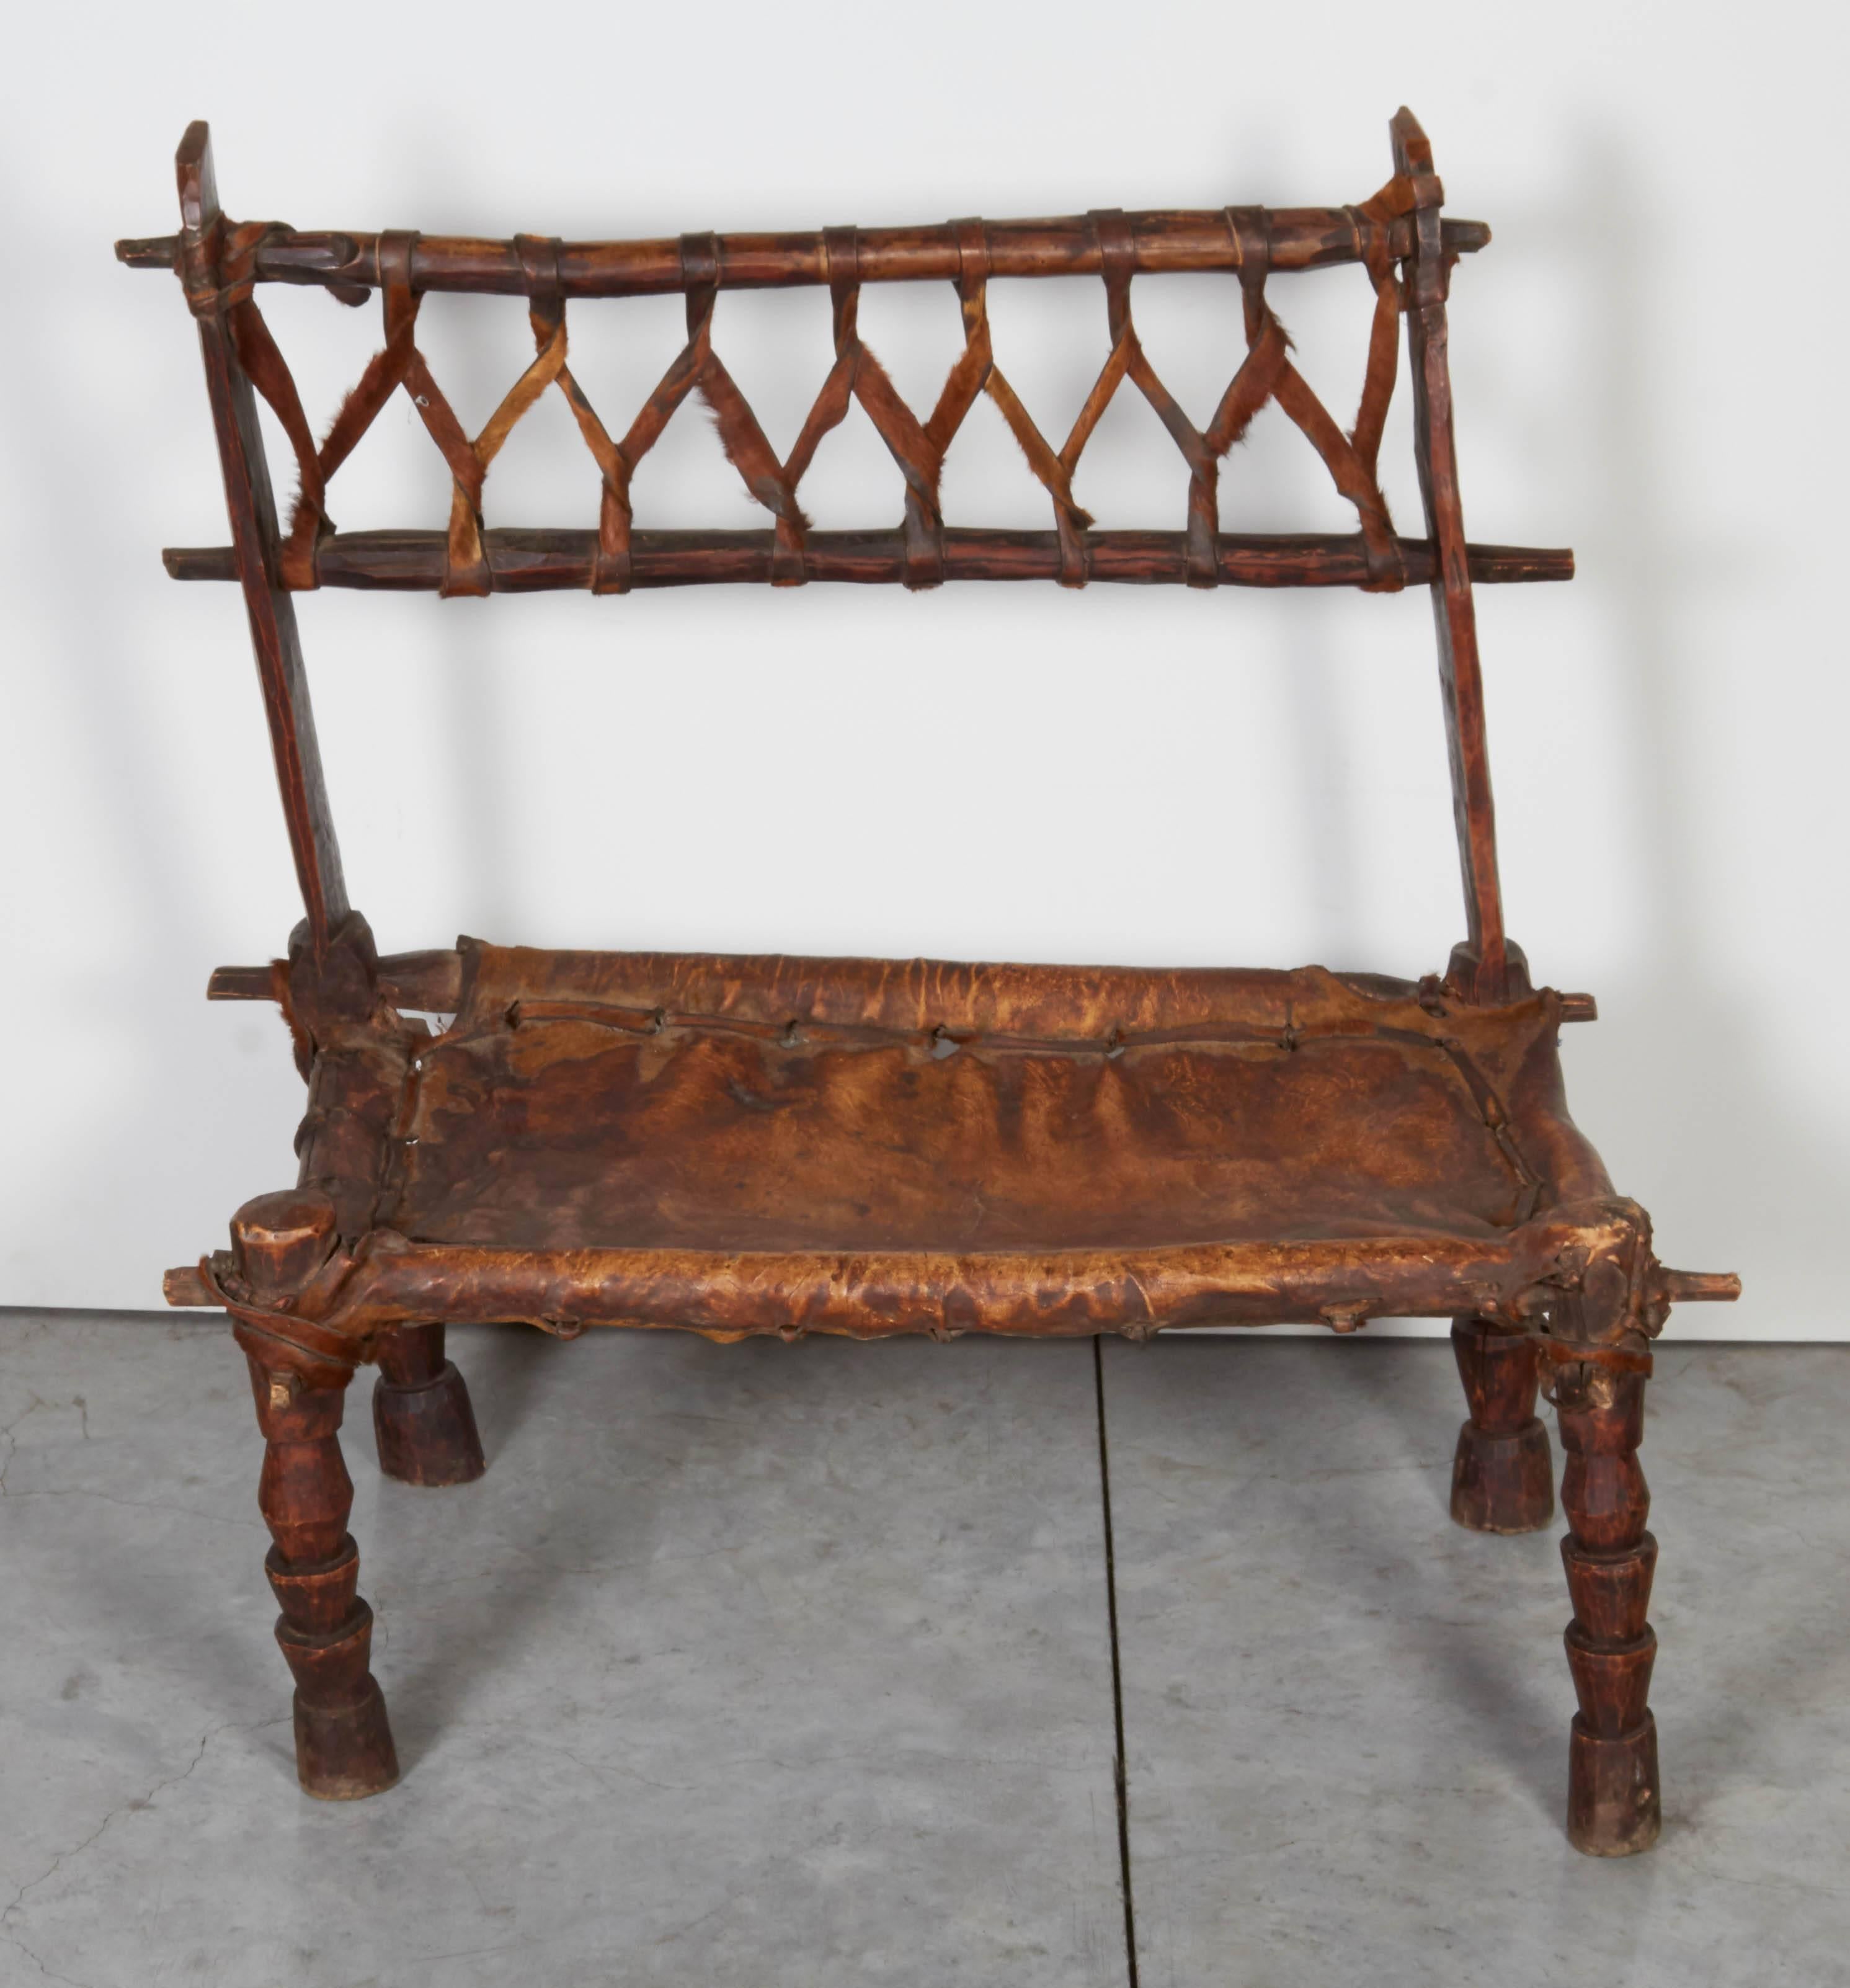 A simple, quirky, rustic wooden bench with a beautifully worn leather seat and crosshatch leather back. This antique low bench from Ethiopia looks great from any angle and has great presence. 
CH370.